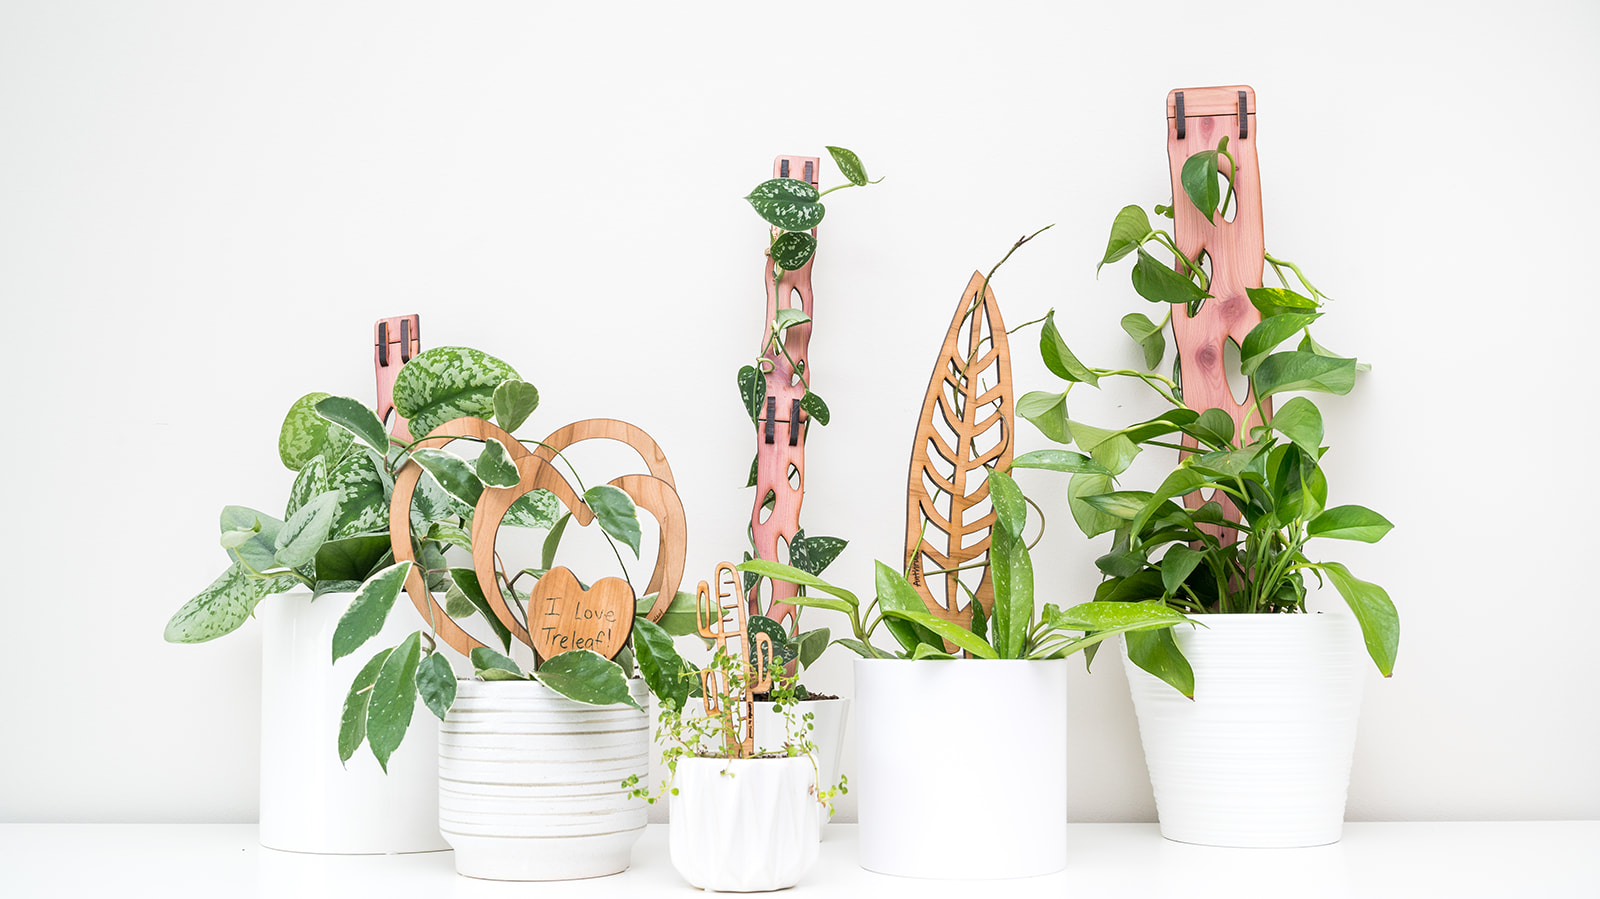 An imagine of an assortment of plants on different wooden support trellises by Treleaf